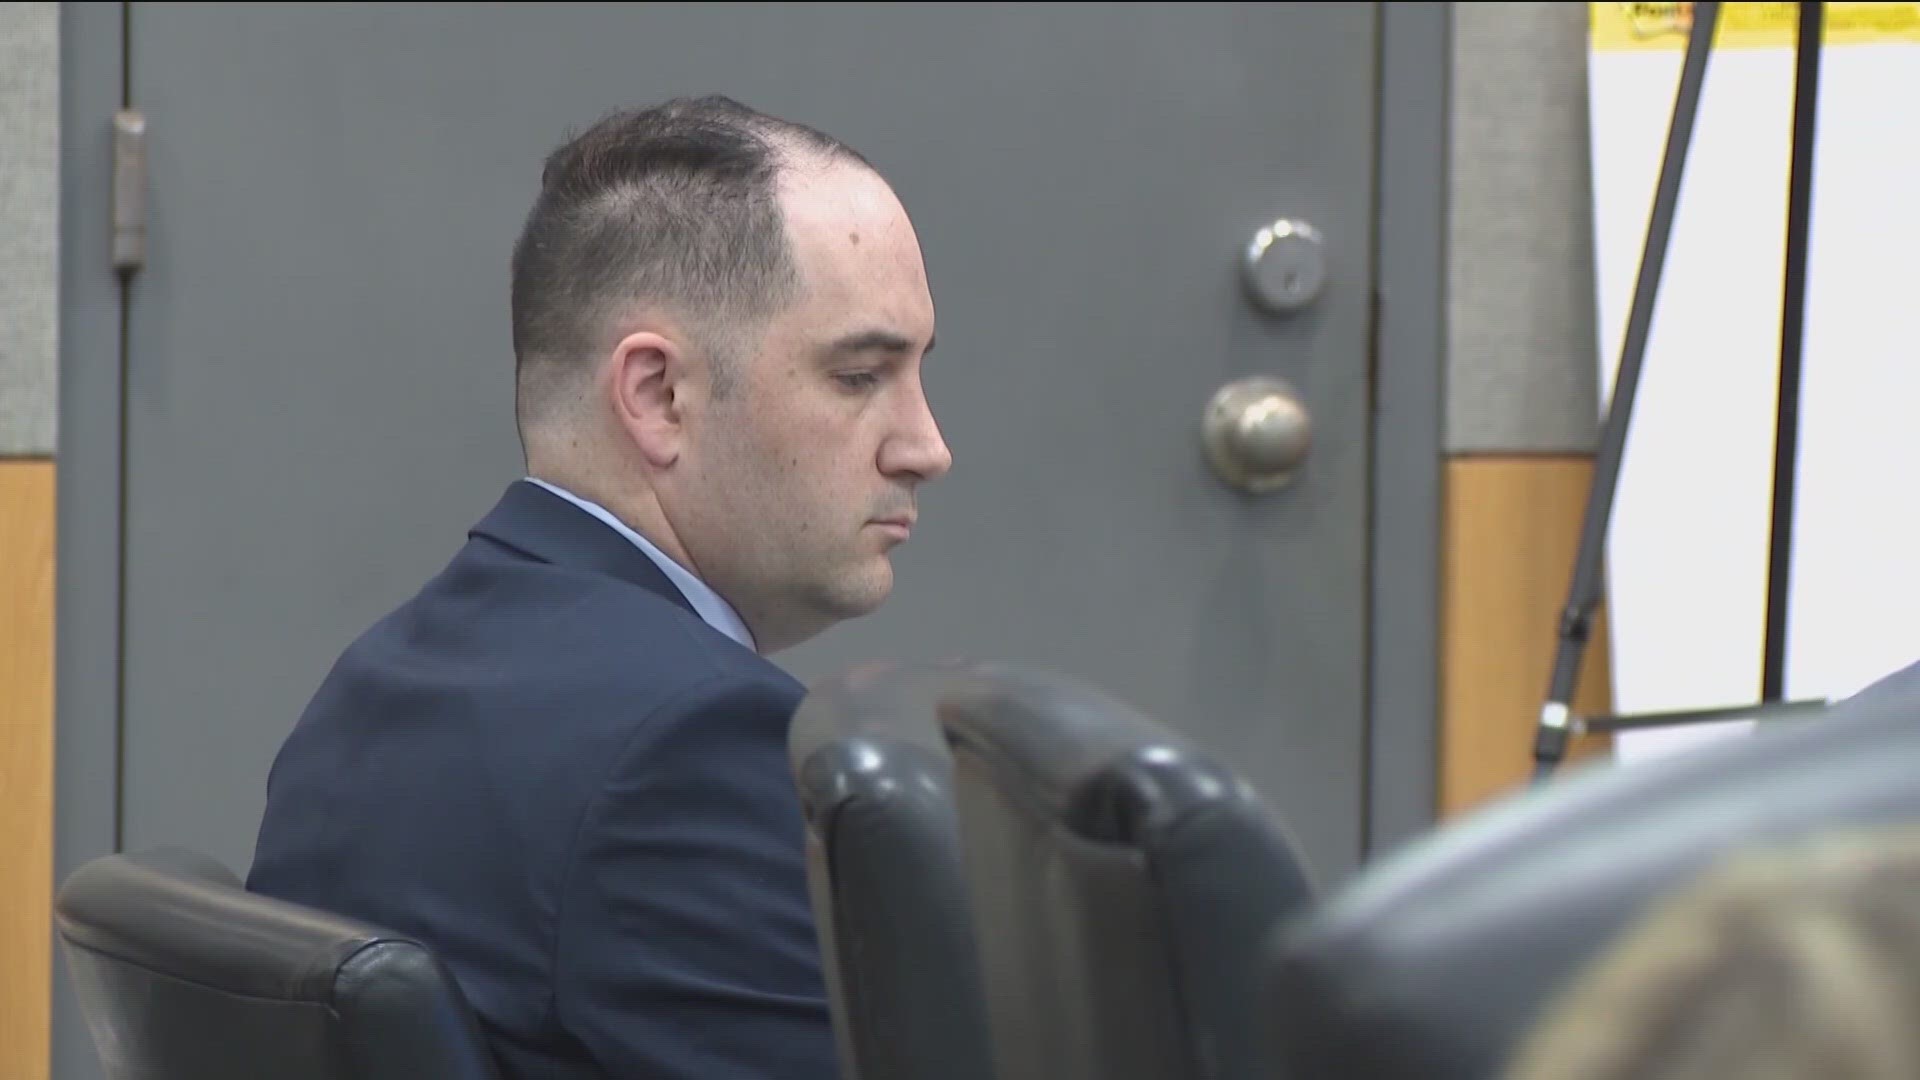 On Wednesday, the defense team for Daniel Perry will push for a new trial. It's been three weeks since a jury found Daniel Perry guilty of murdering Garrett Foster.